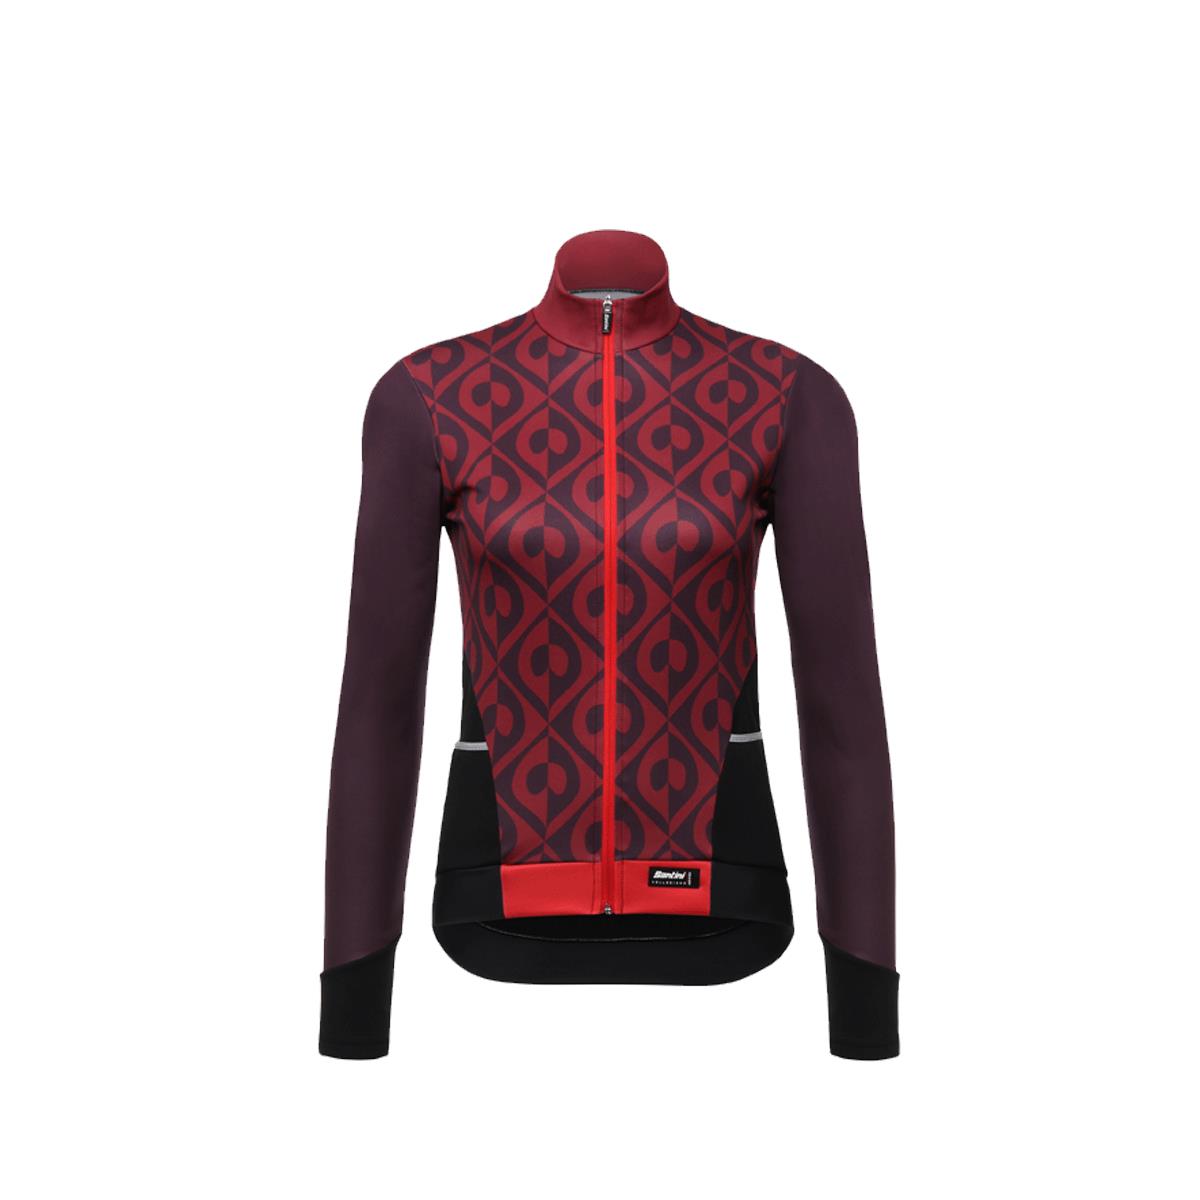 Santini Fashion Coral Bordeaux Large Ladies Long Sleeve Cycling Jersey